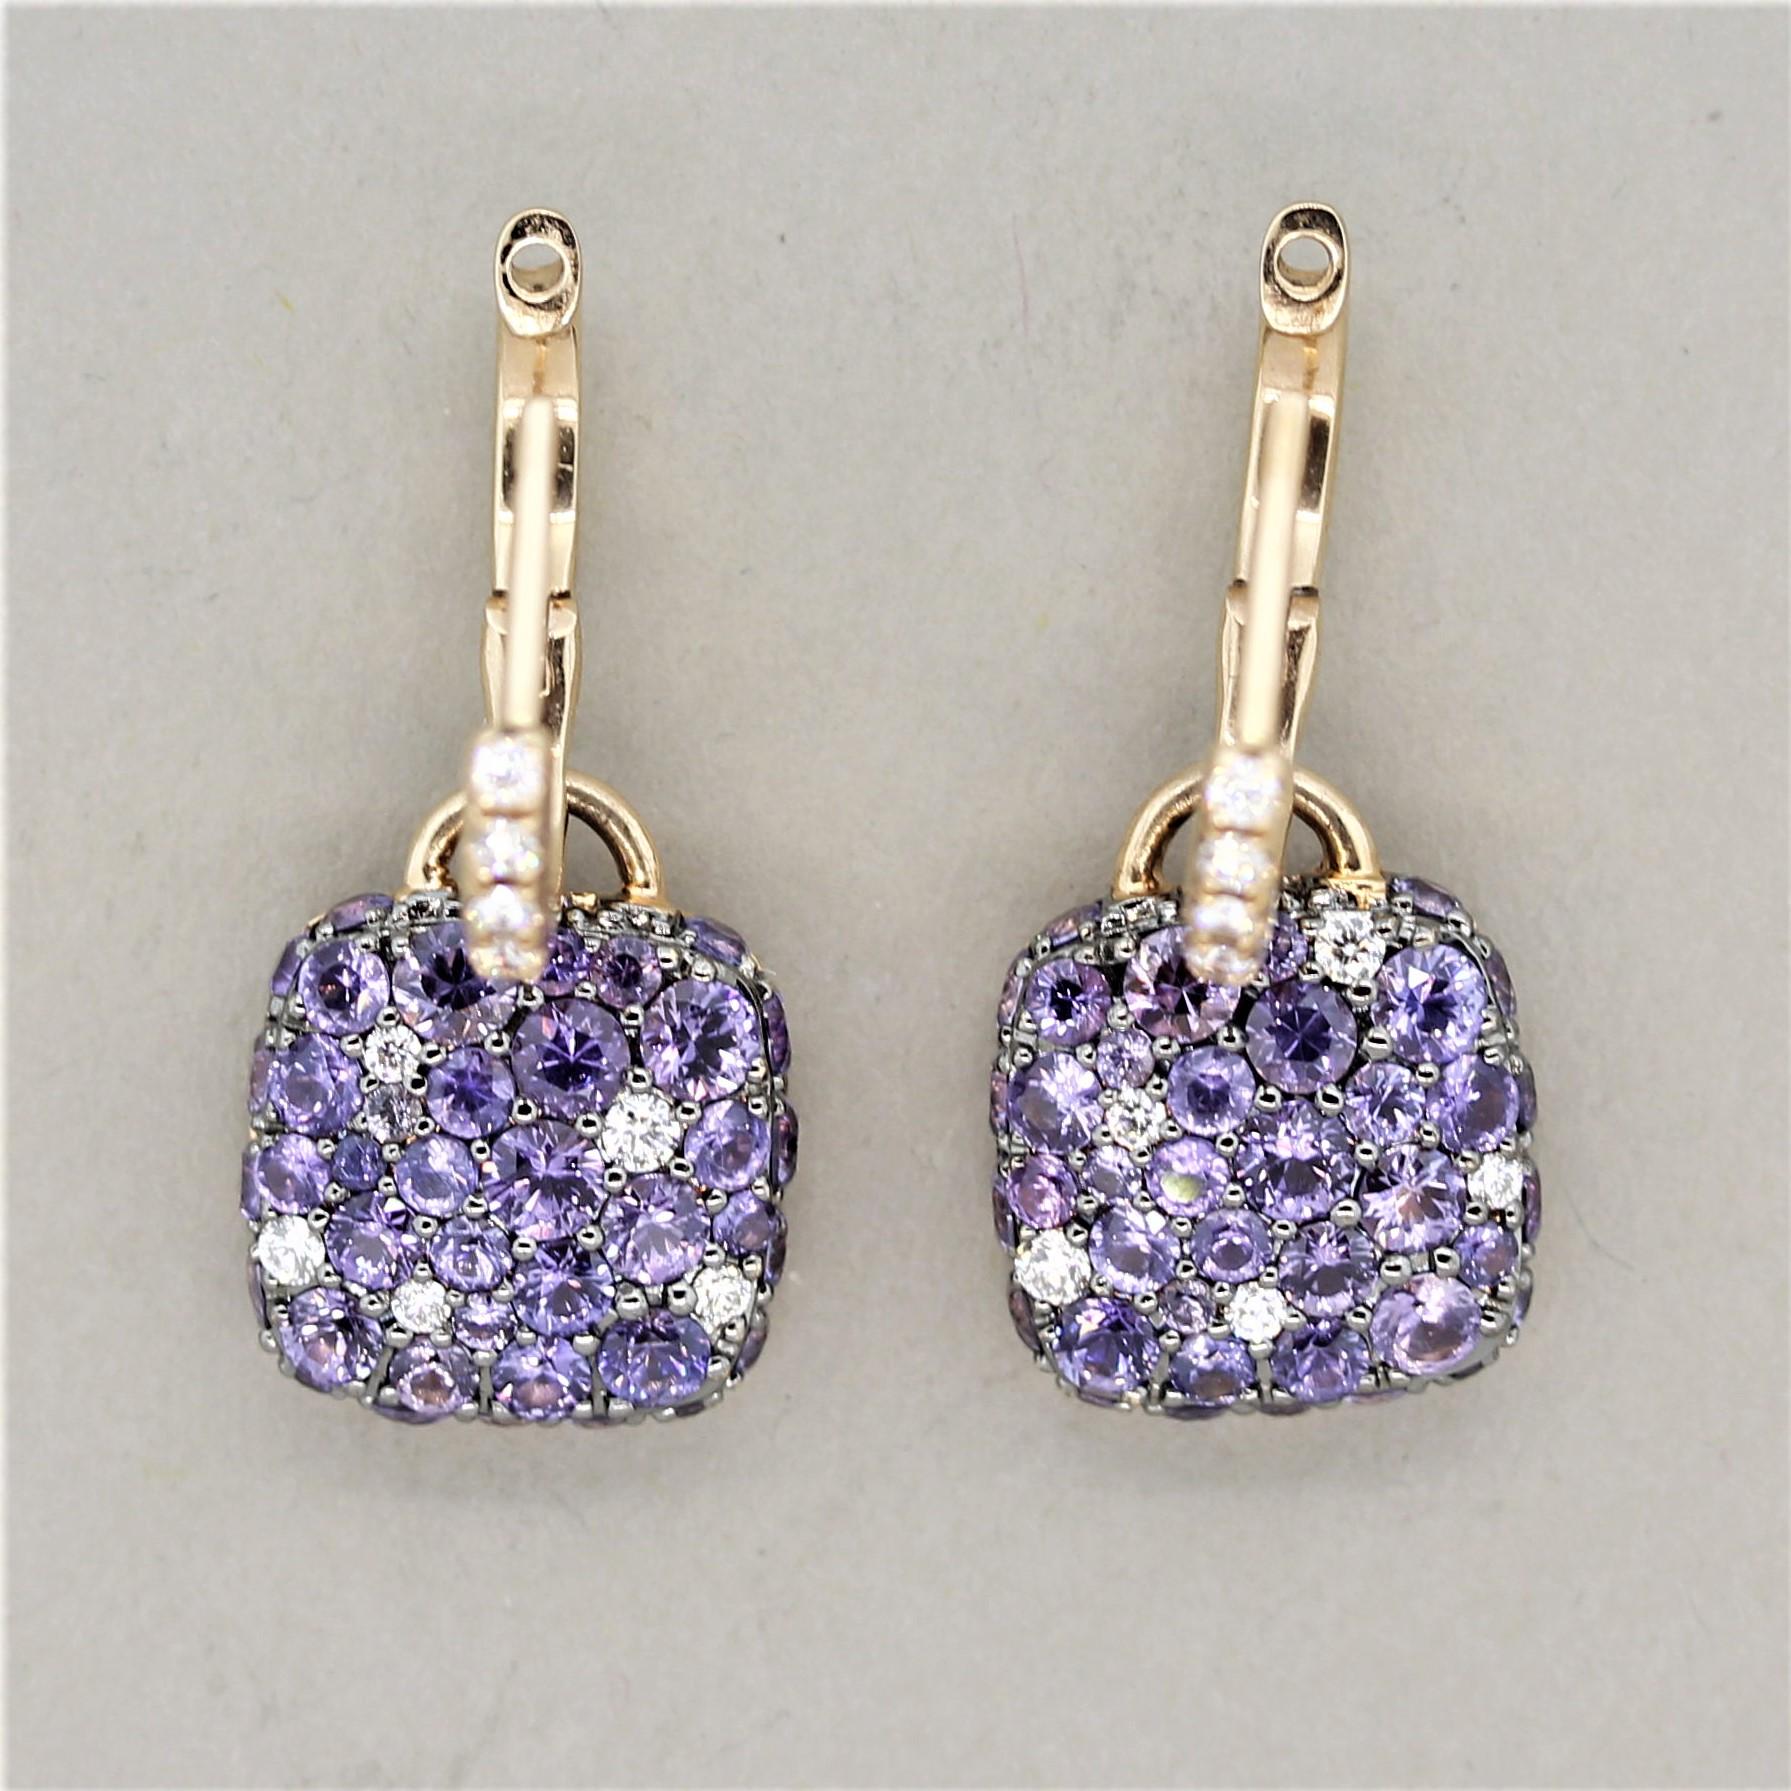 A fun and fashionable pair of earrings! They feature 4.60 carats of round cut fancy sapphires which have various shades of purple! The colors of the sapphires range from purple to pink and contrast with each other. Adding to that are 0.34 carats of